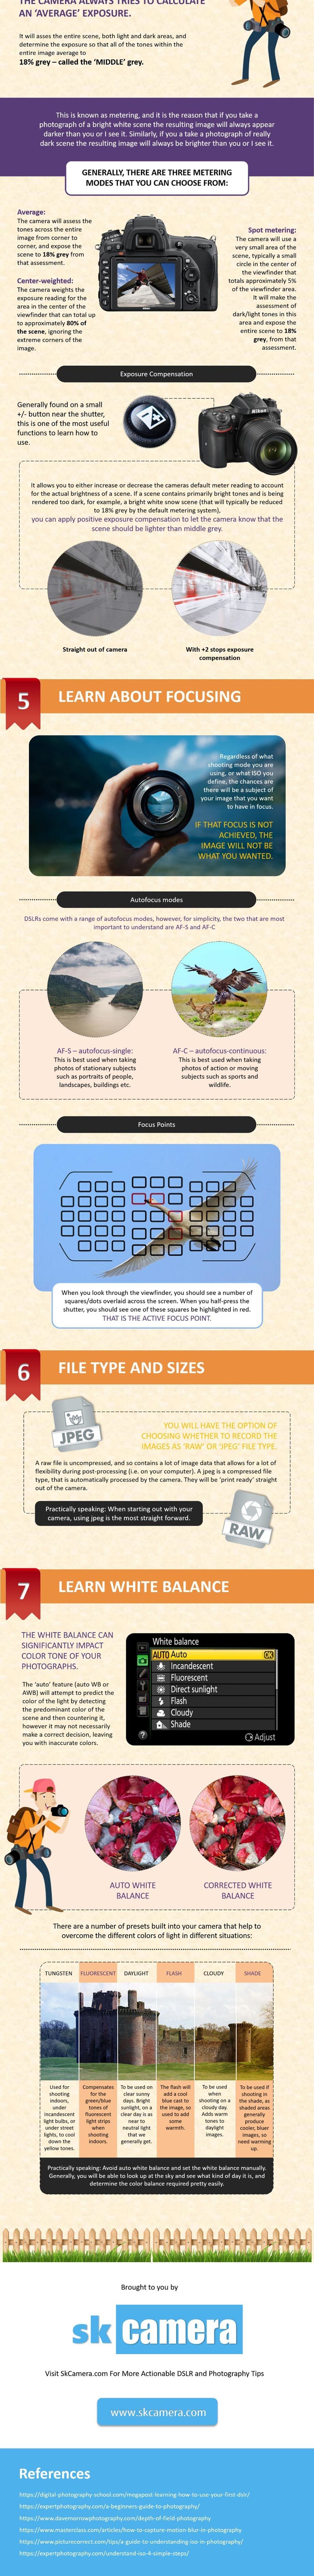 How to Use a DSLR Camera - The Ultimate Guide (Infographic) - 2